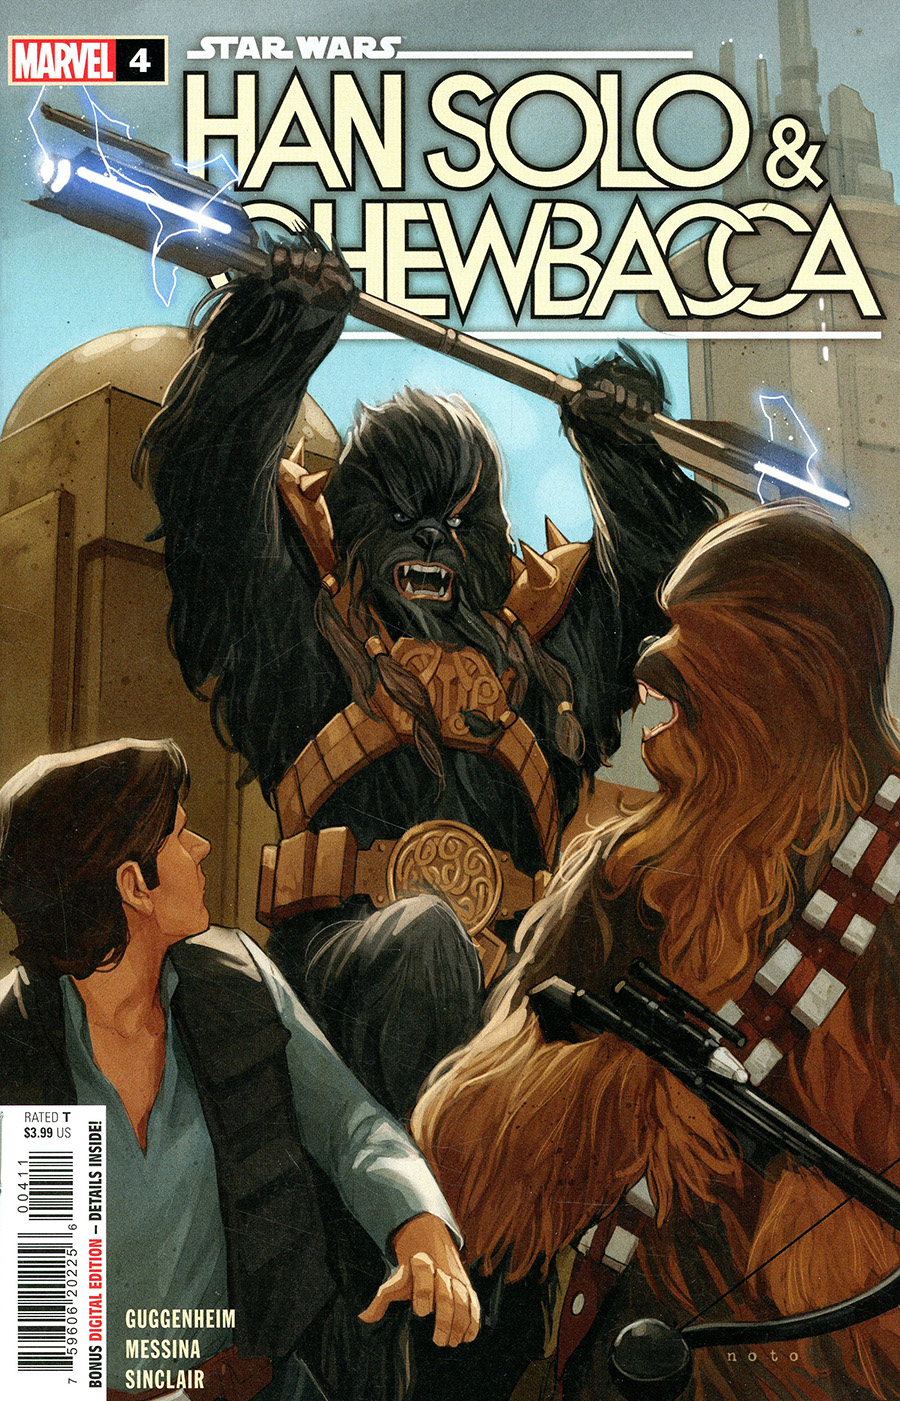 Star Wars Han Solo & Chewbacca #4 Cover A Regular Phil Noto Cover